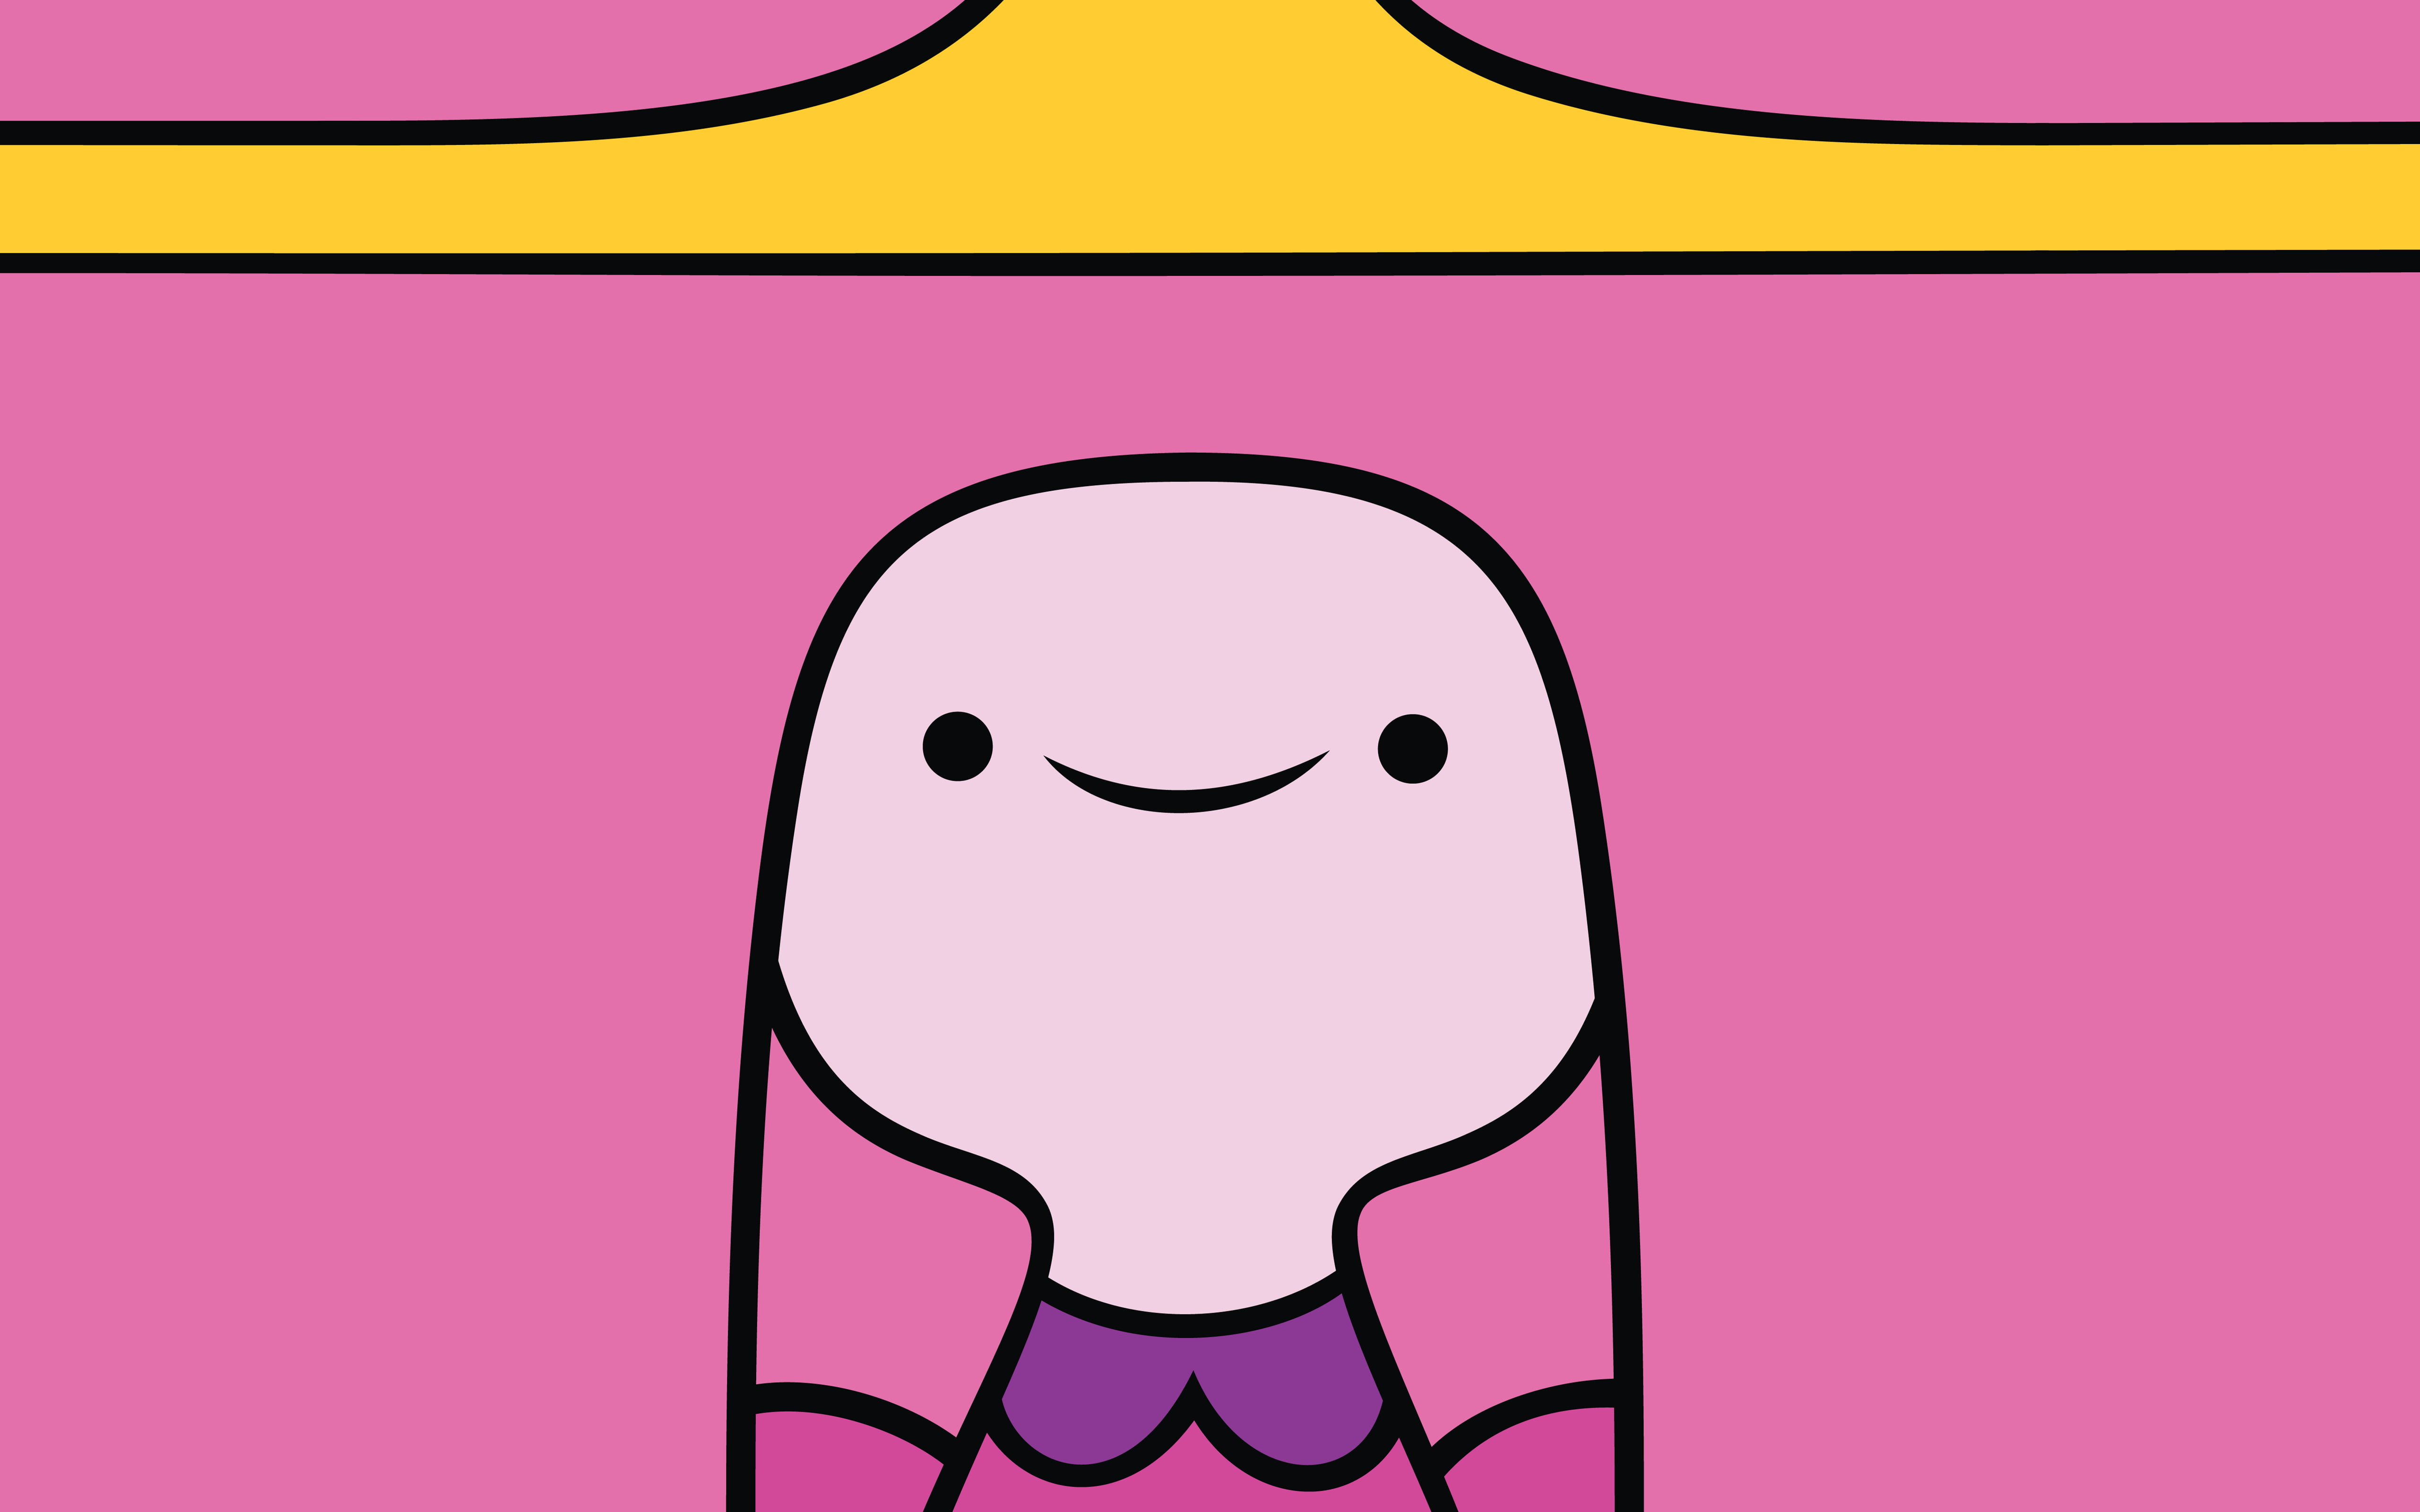 allan cuthbertson recommends Pictures Of Princess Bubblegum From Adventure Time